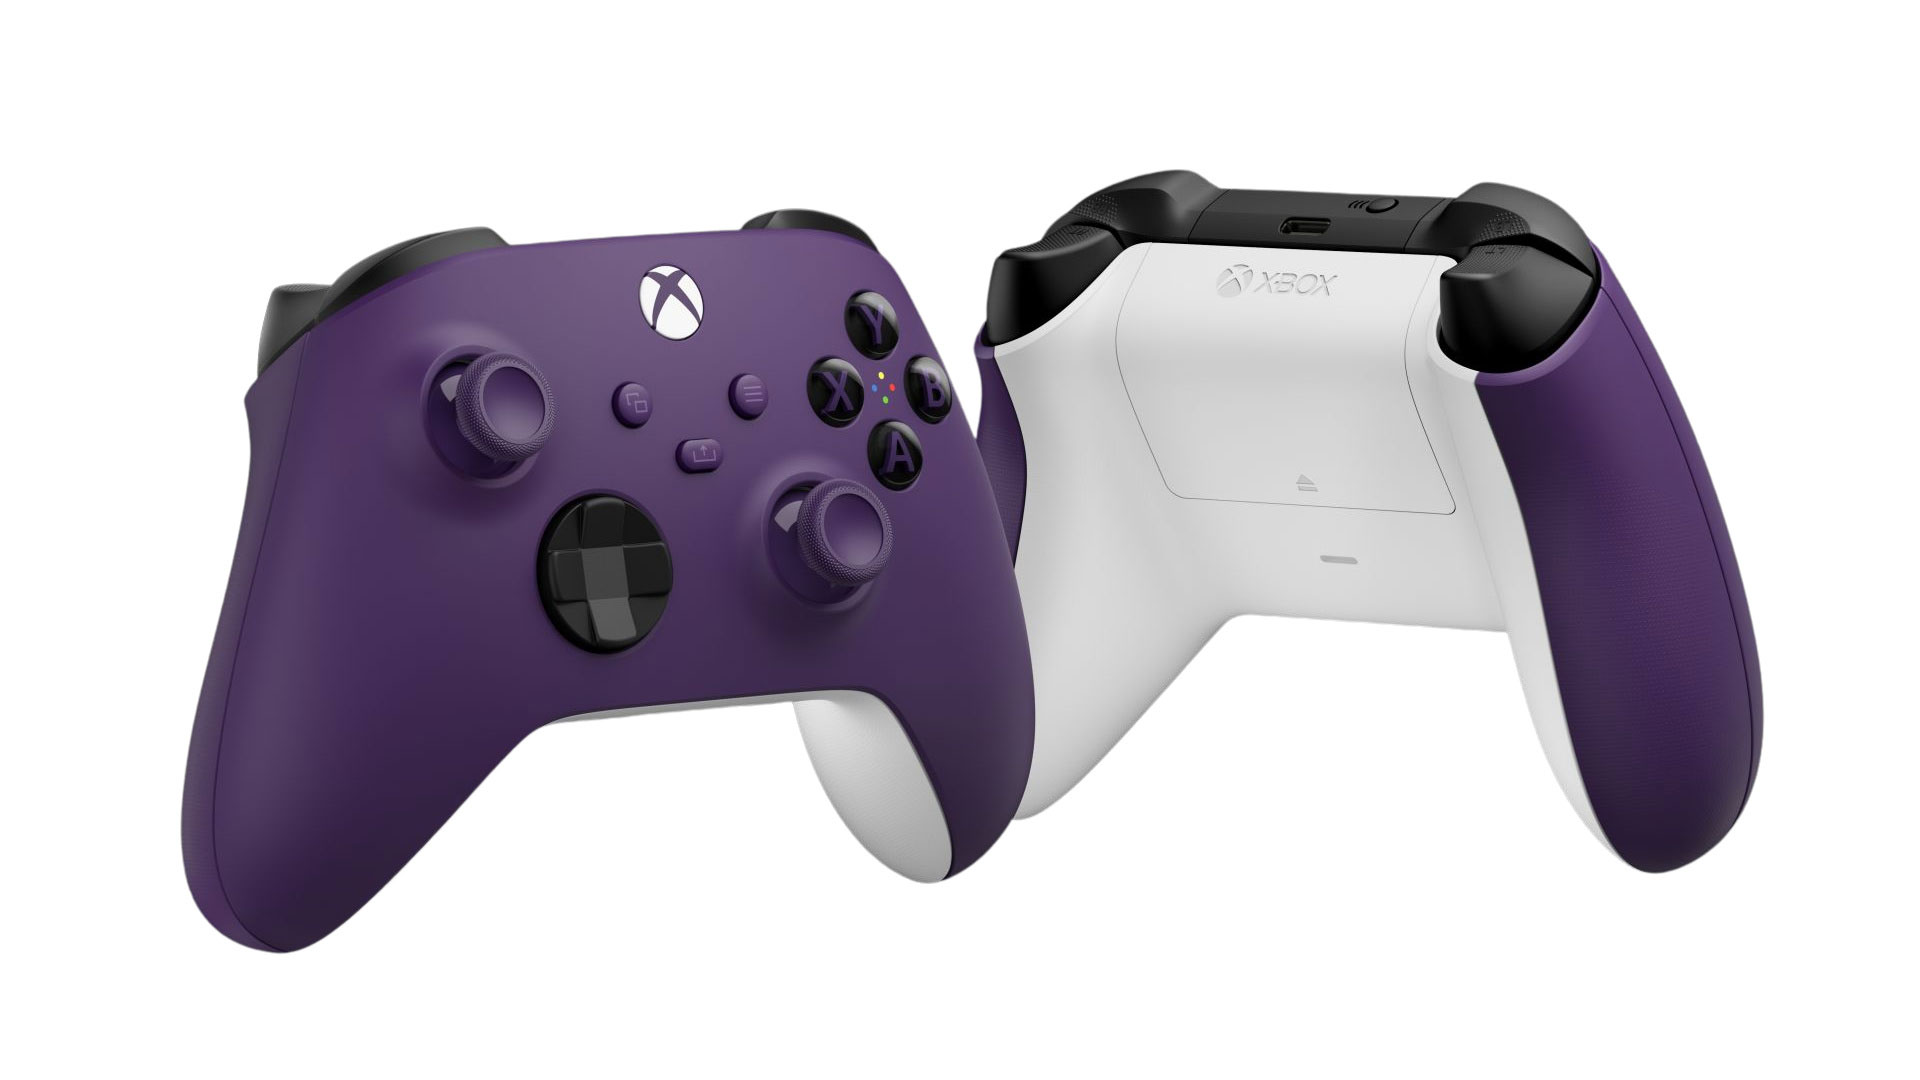 The newest Xbox Wireless Controller finish is called Astral Purple